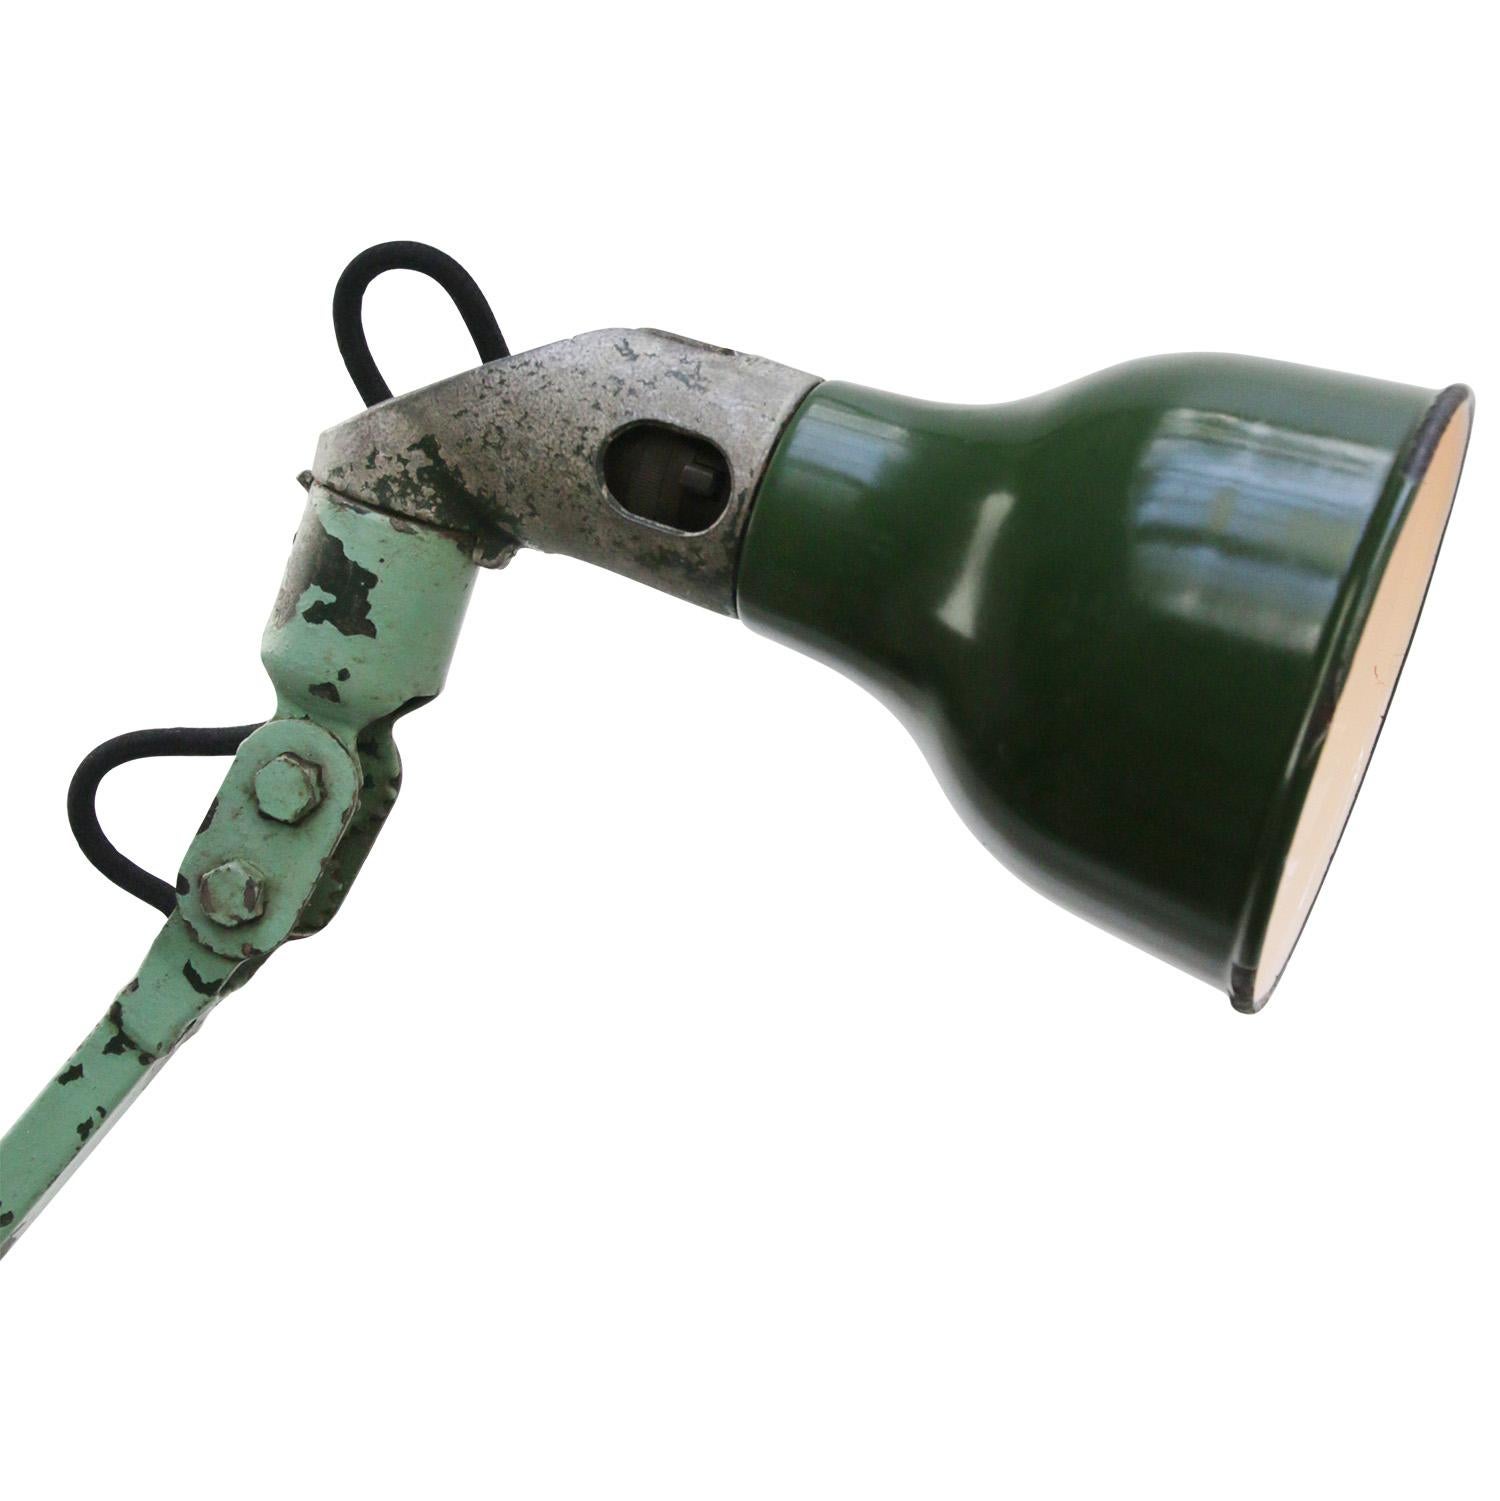 1930s Green enamel, cast iron industrial 2 arm machinist work light by MEK ELEK, UK
Adjustable in height and angle
Including plug and switch

Base size 7 × 7 cm

Weight: 2.40 kg / 5.3 lb

Priced per individual item. All lamps have been made